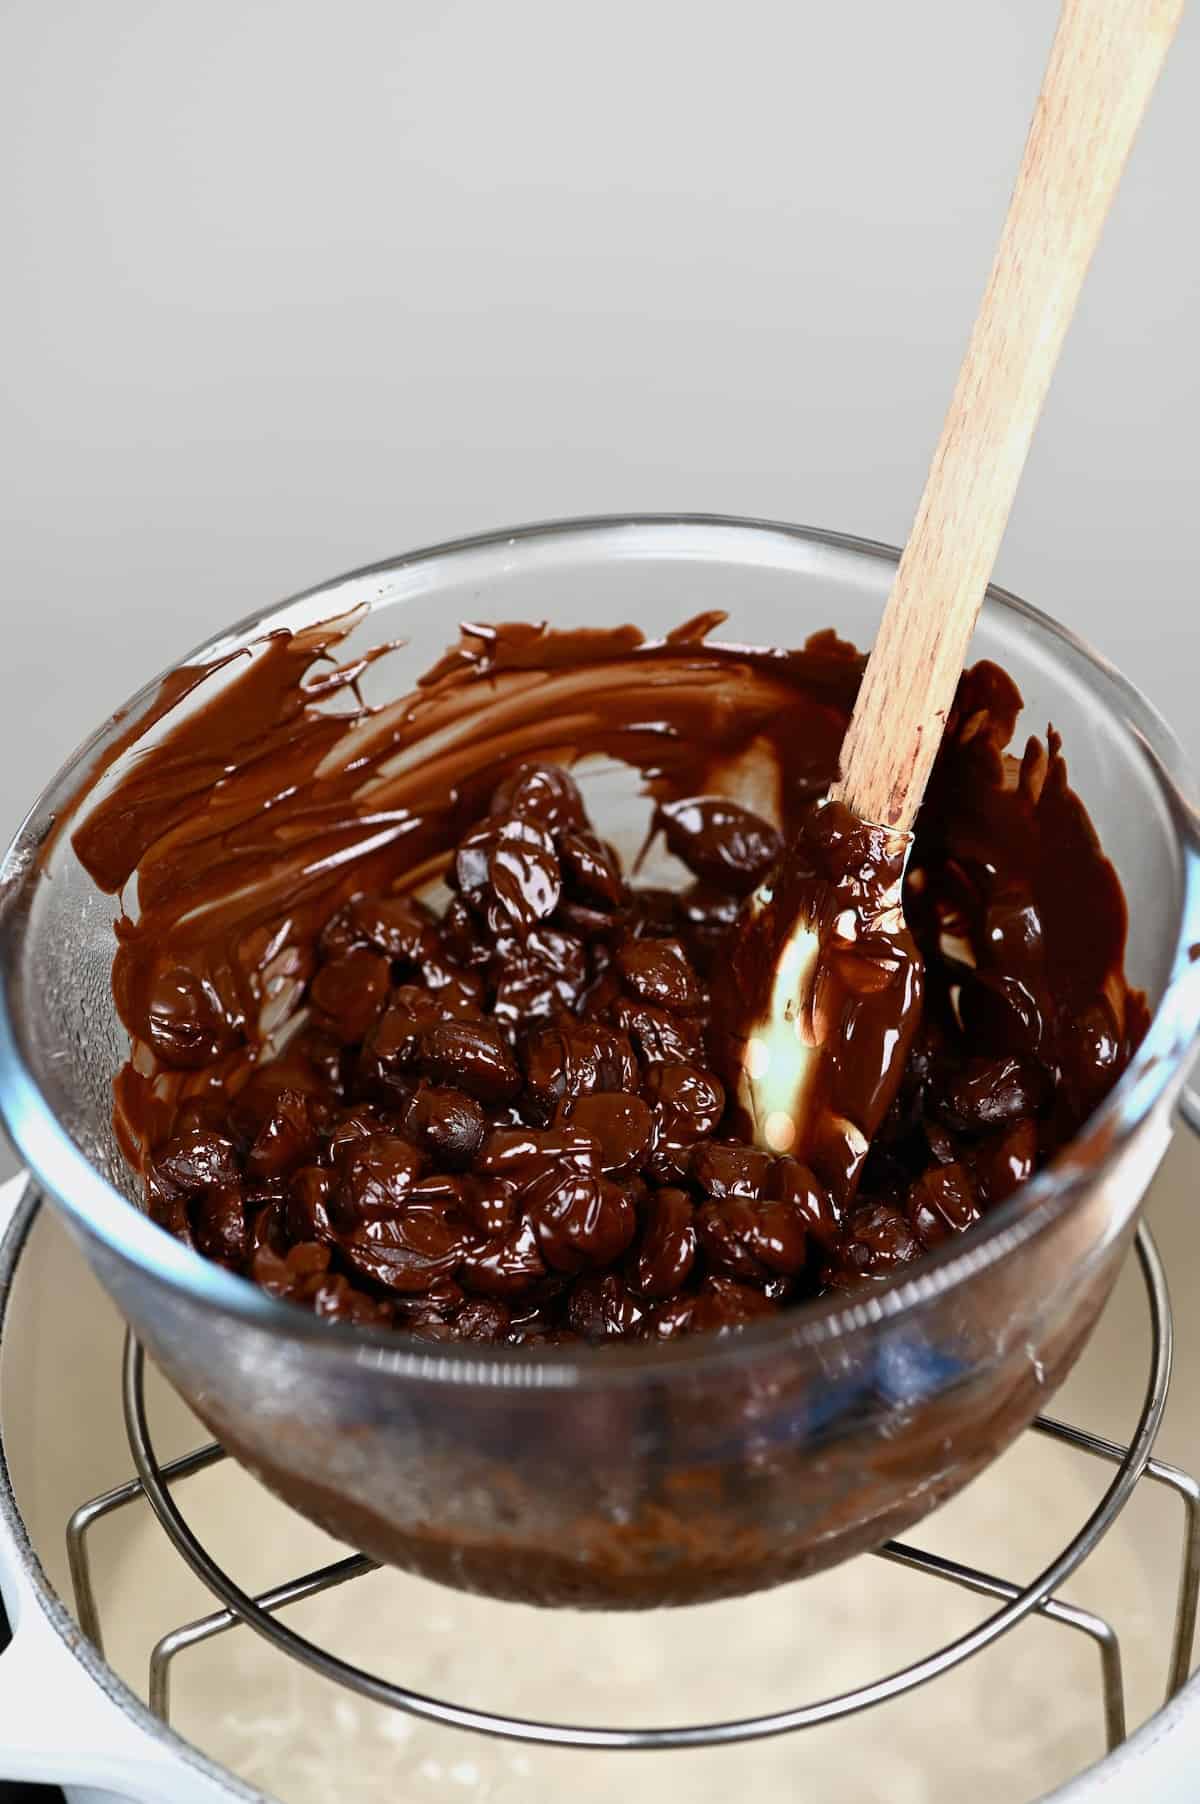 Chocolate callets melting in a bowl